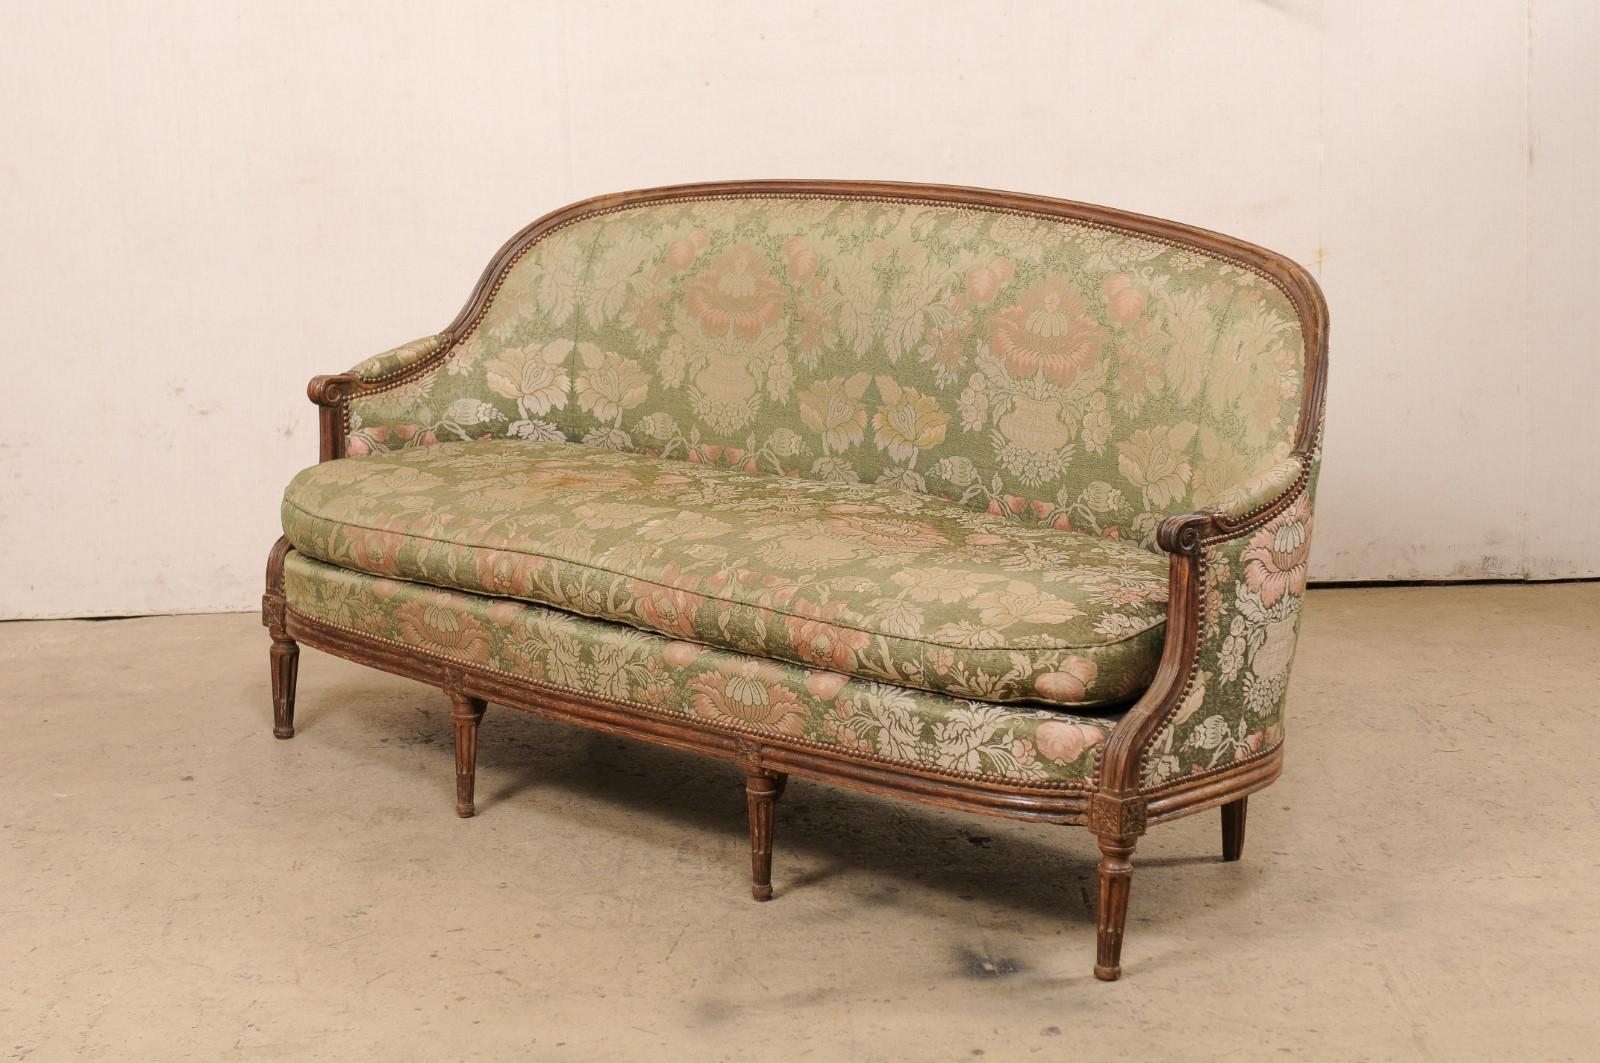 Swedish Gustavian Carved-Wood and Upholstered Tub Sofa, Early 19th Century For Sale 6